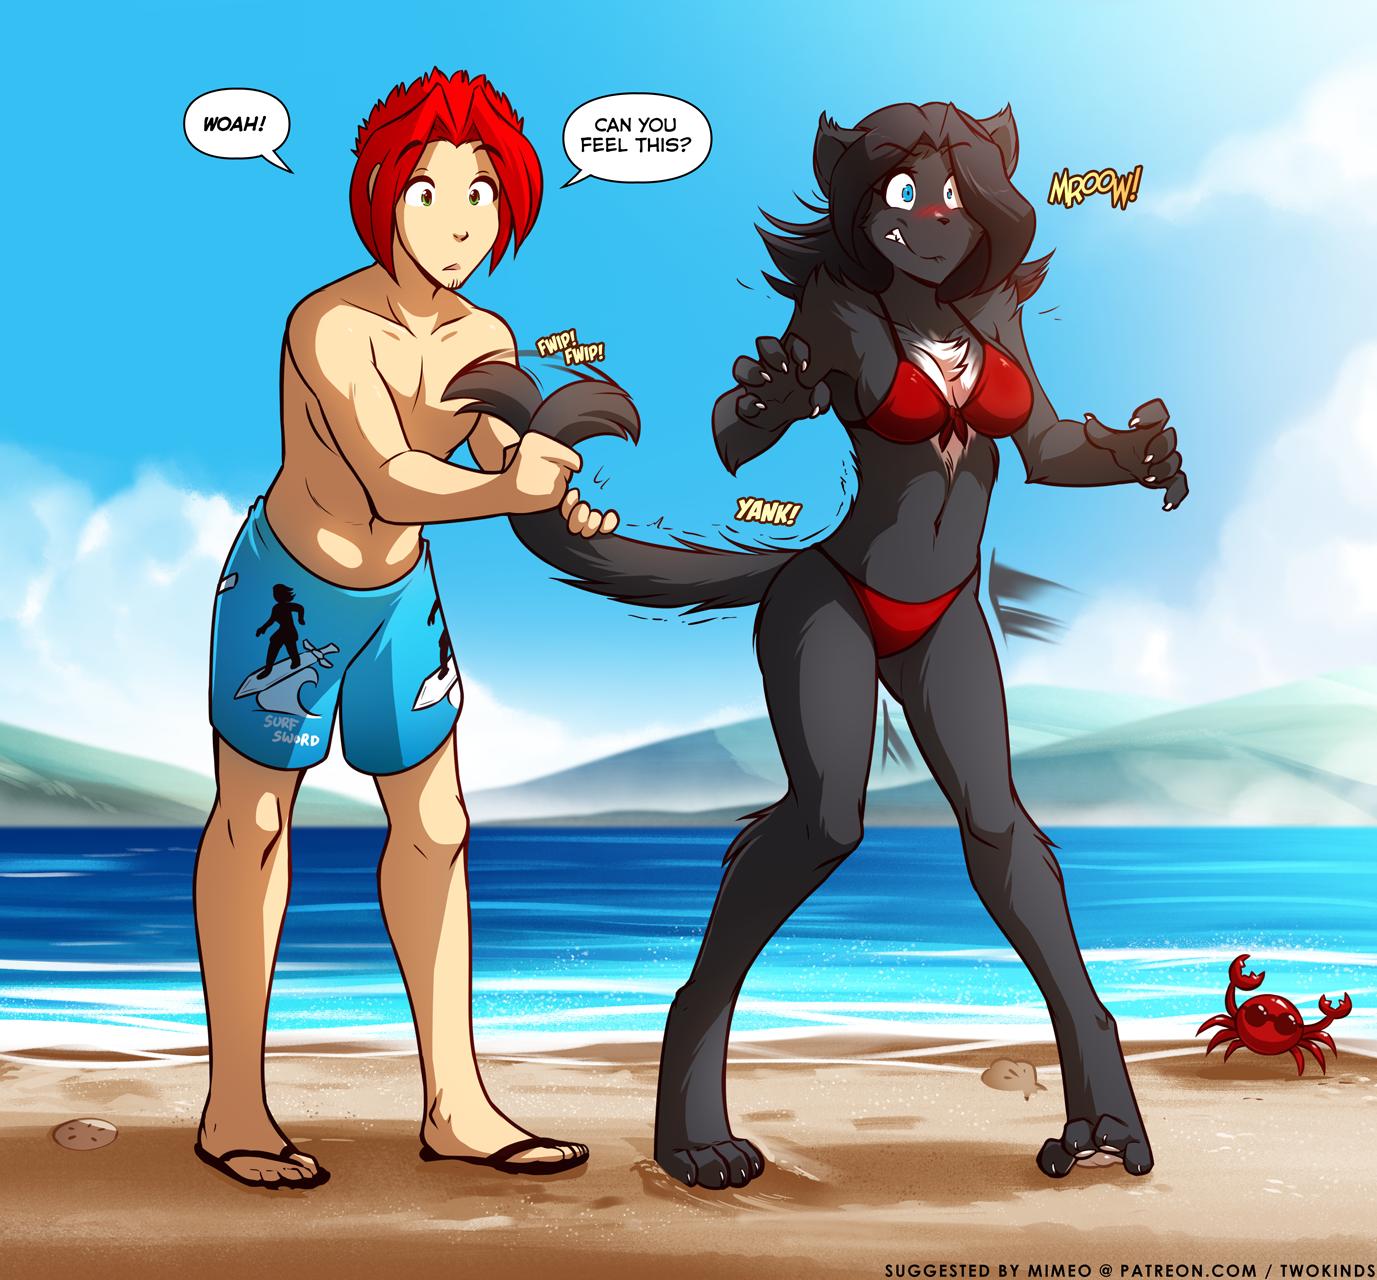 TwoKinds on Twitter.